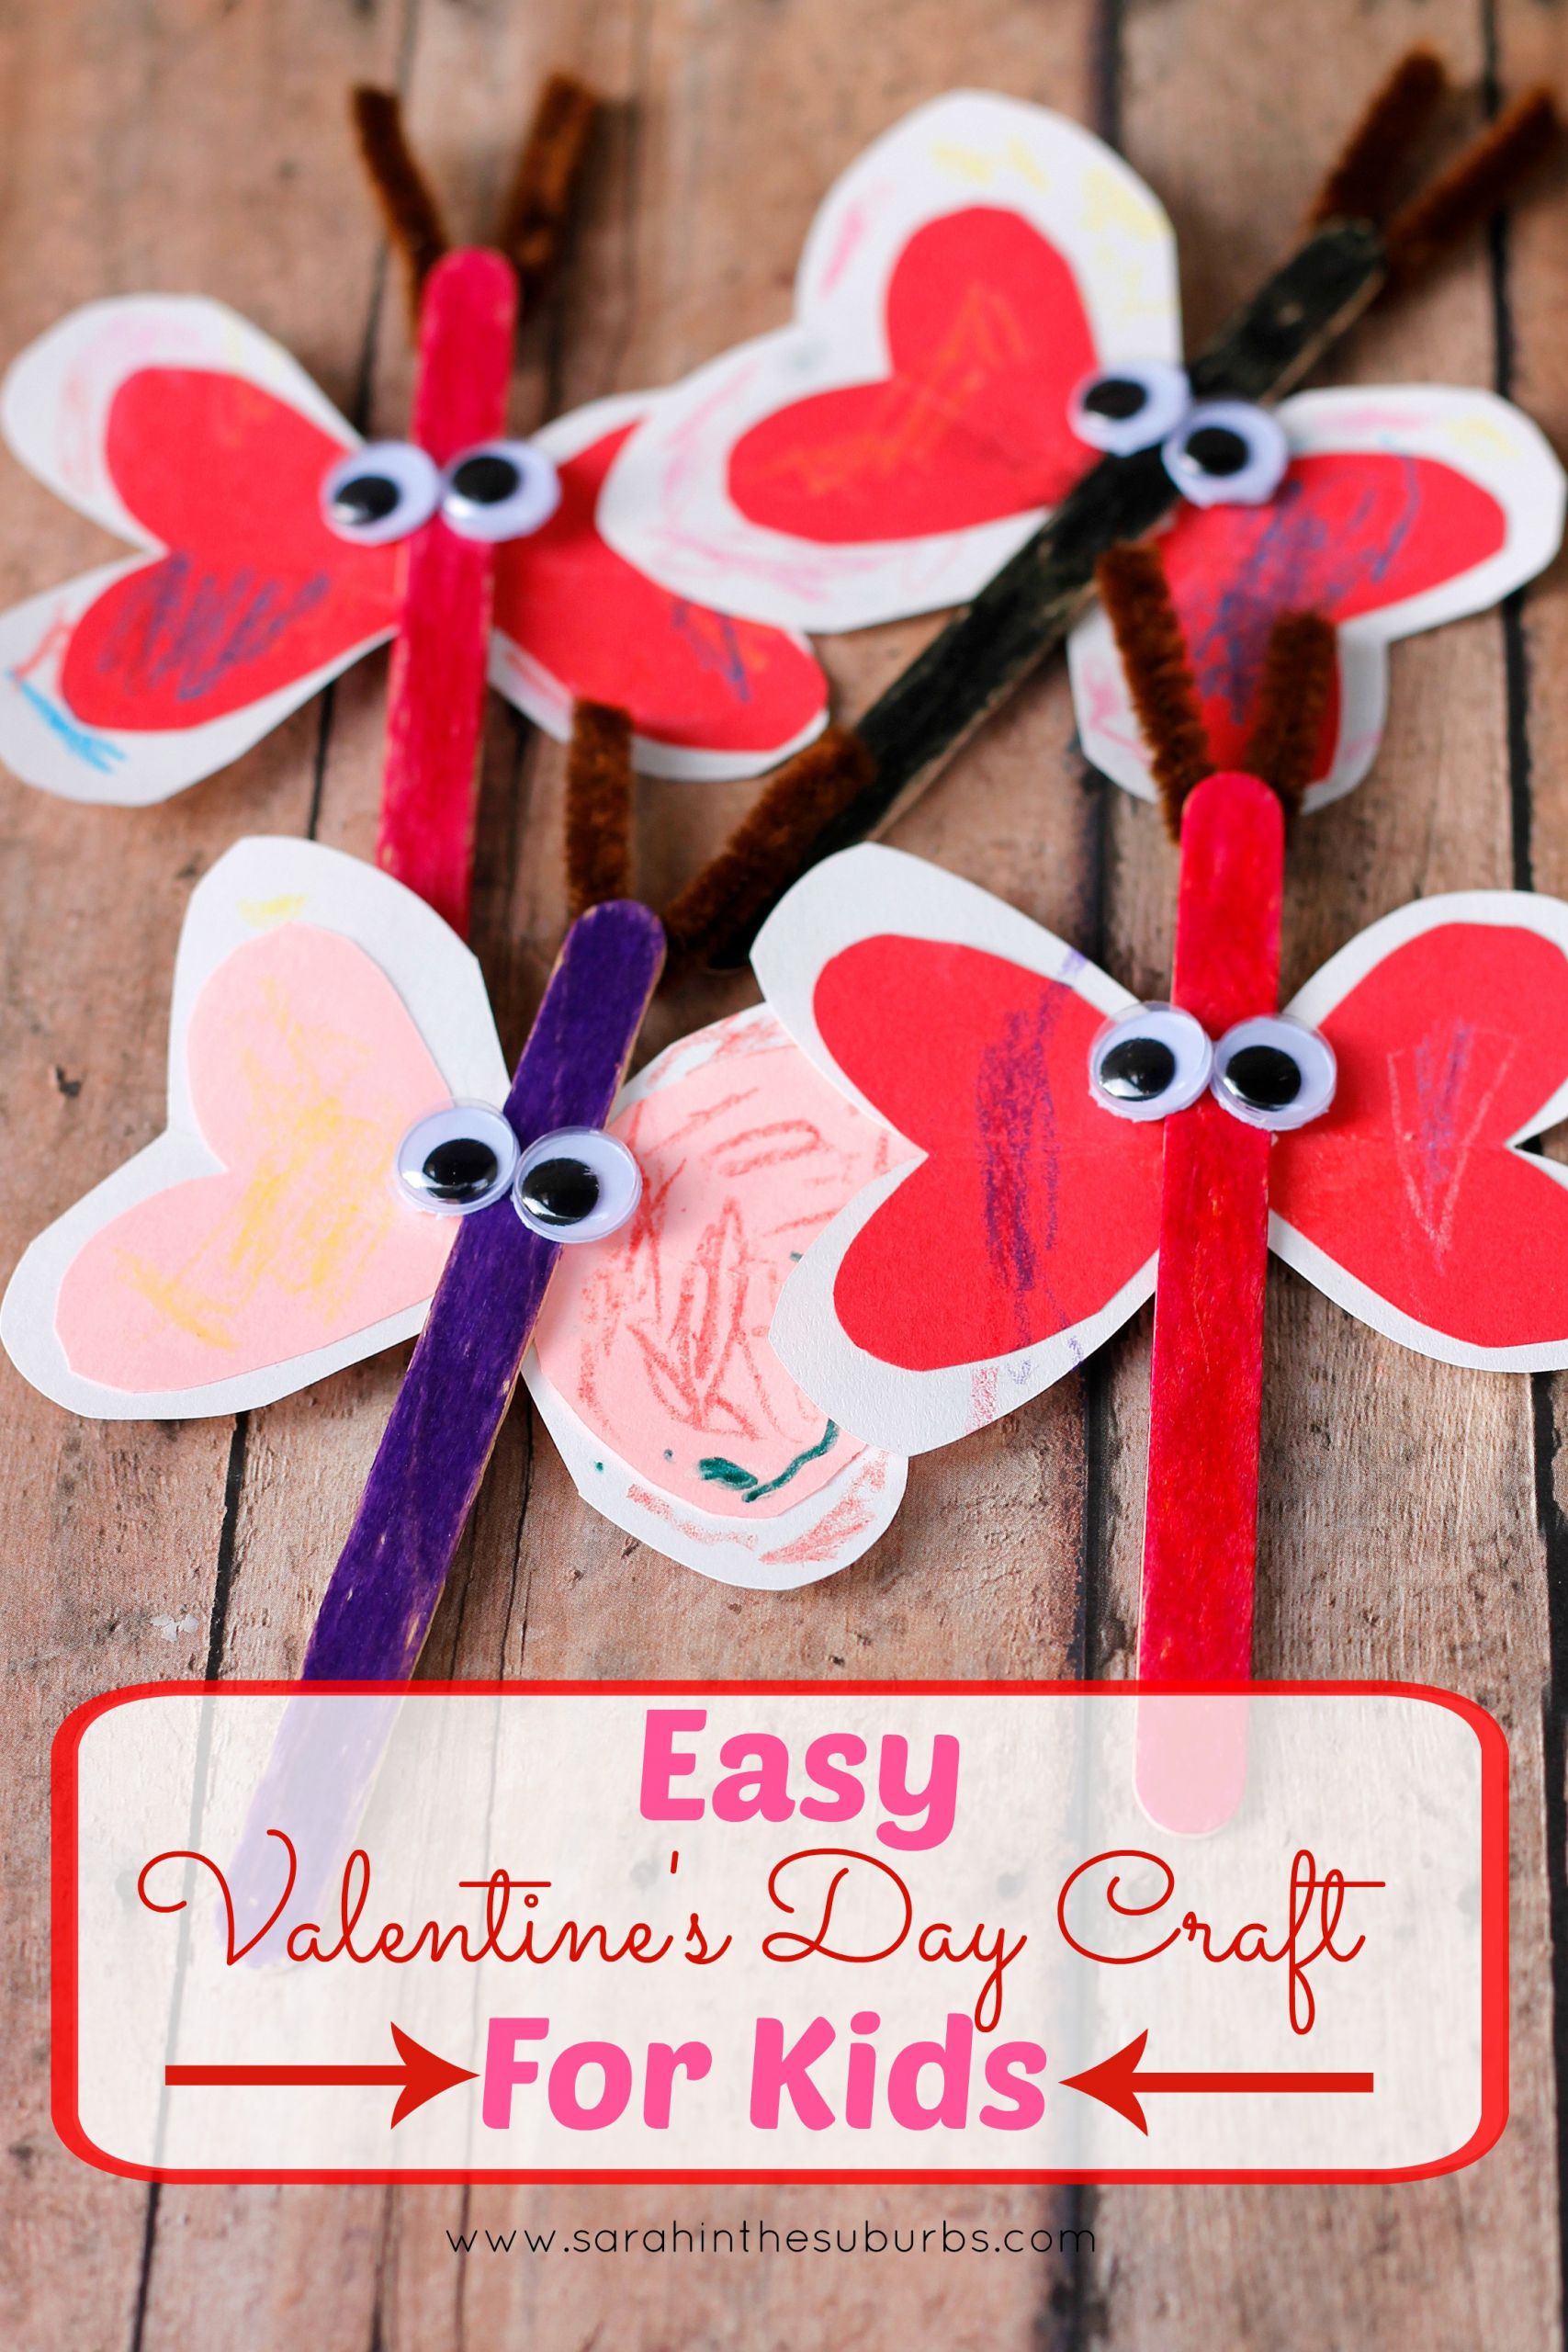 Valentines Crafts For Kids
 Easy Valentine s Day Craft for Kids Sarah in the Suburbs